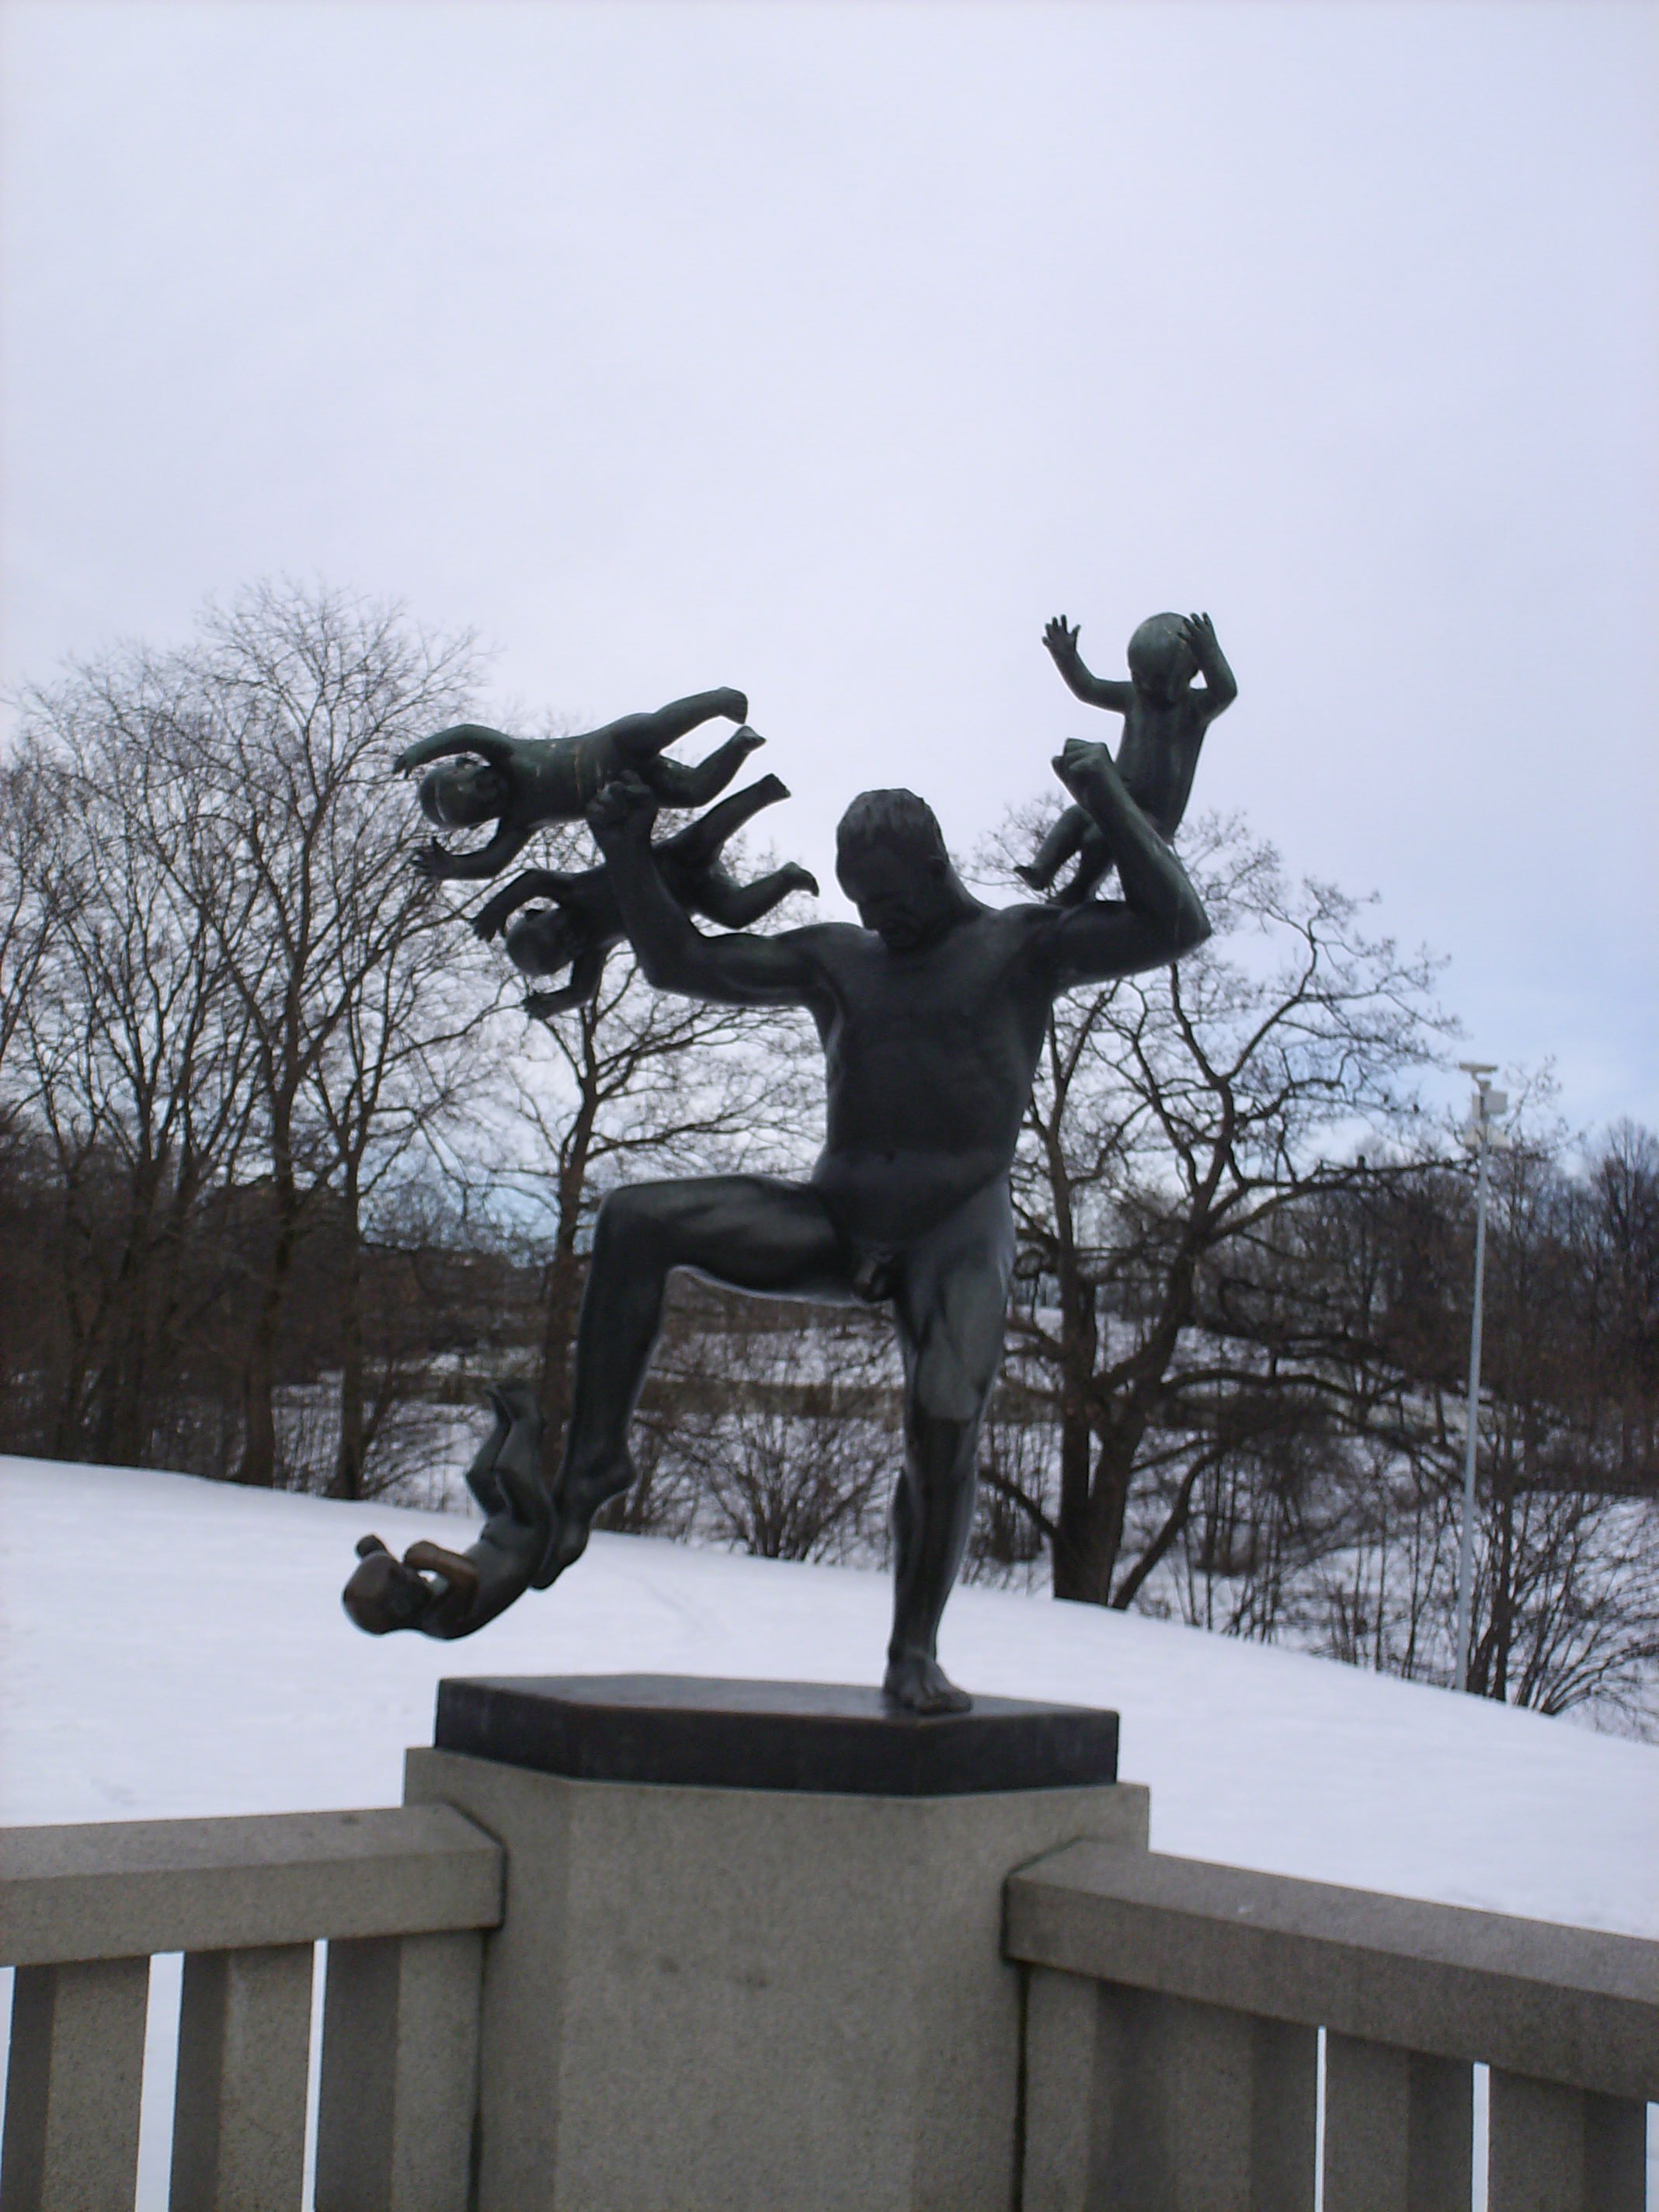 Sculpture of a man attacked by angry babies